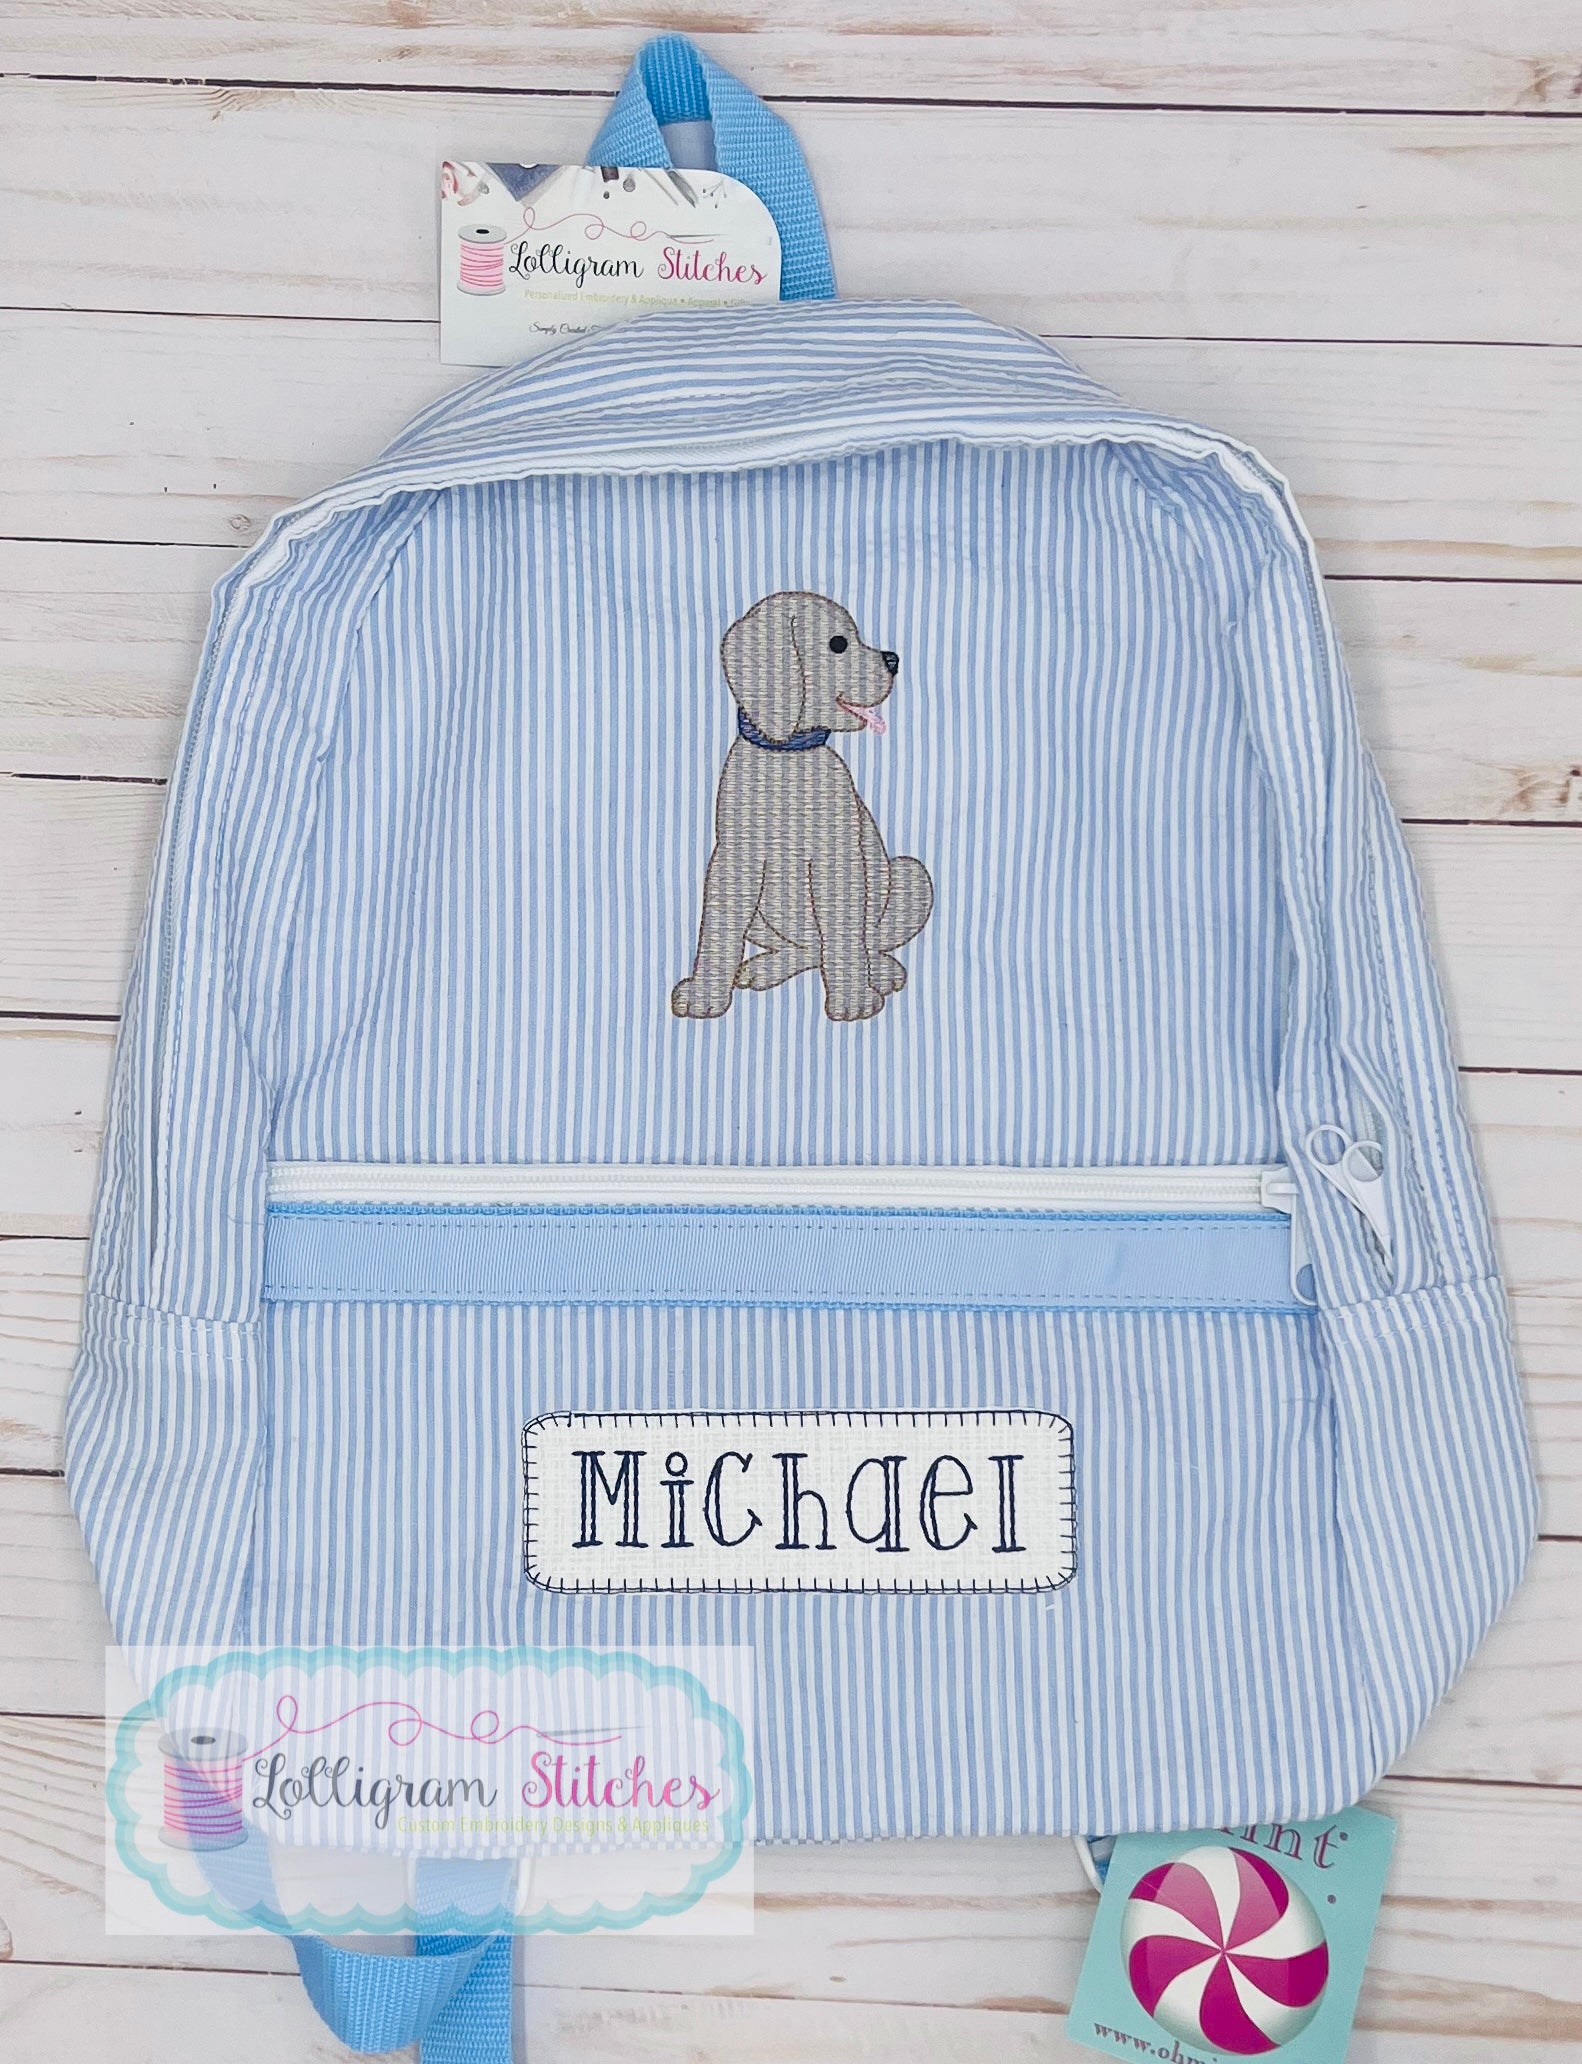 Personalized Backpack by Mint Camo